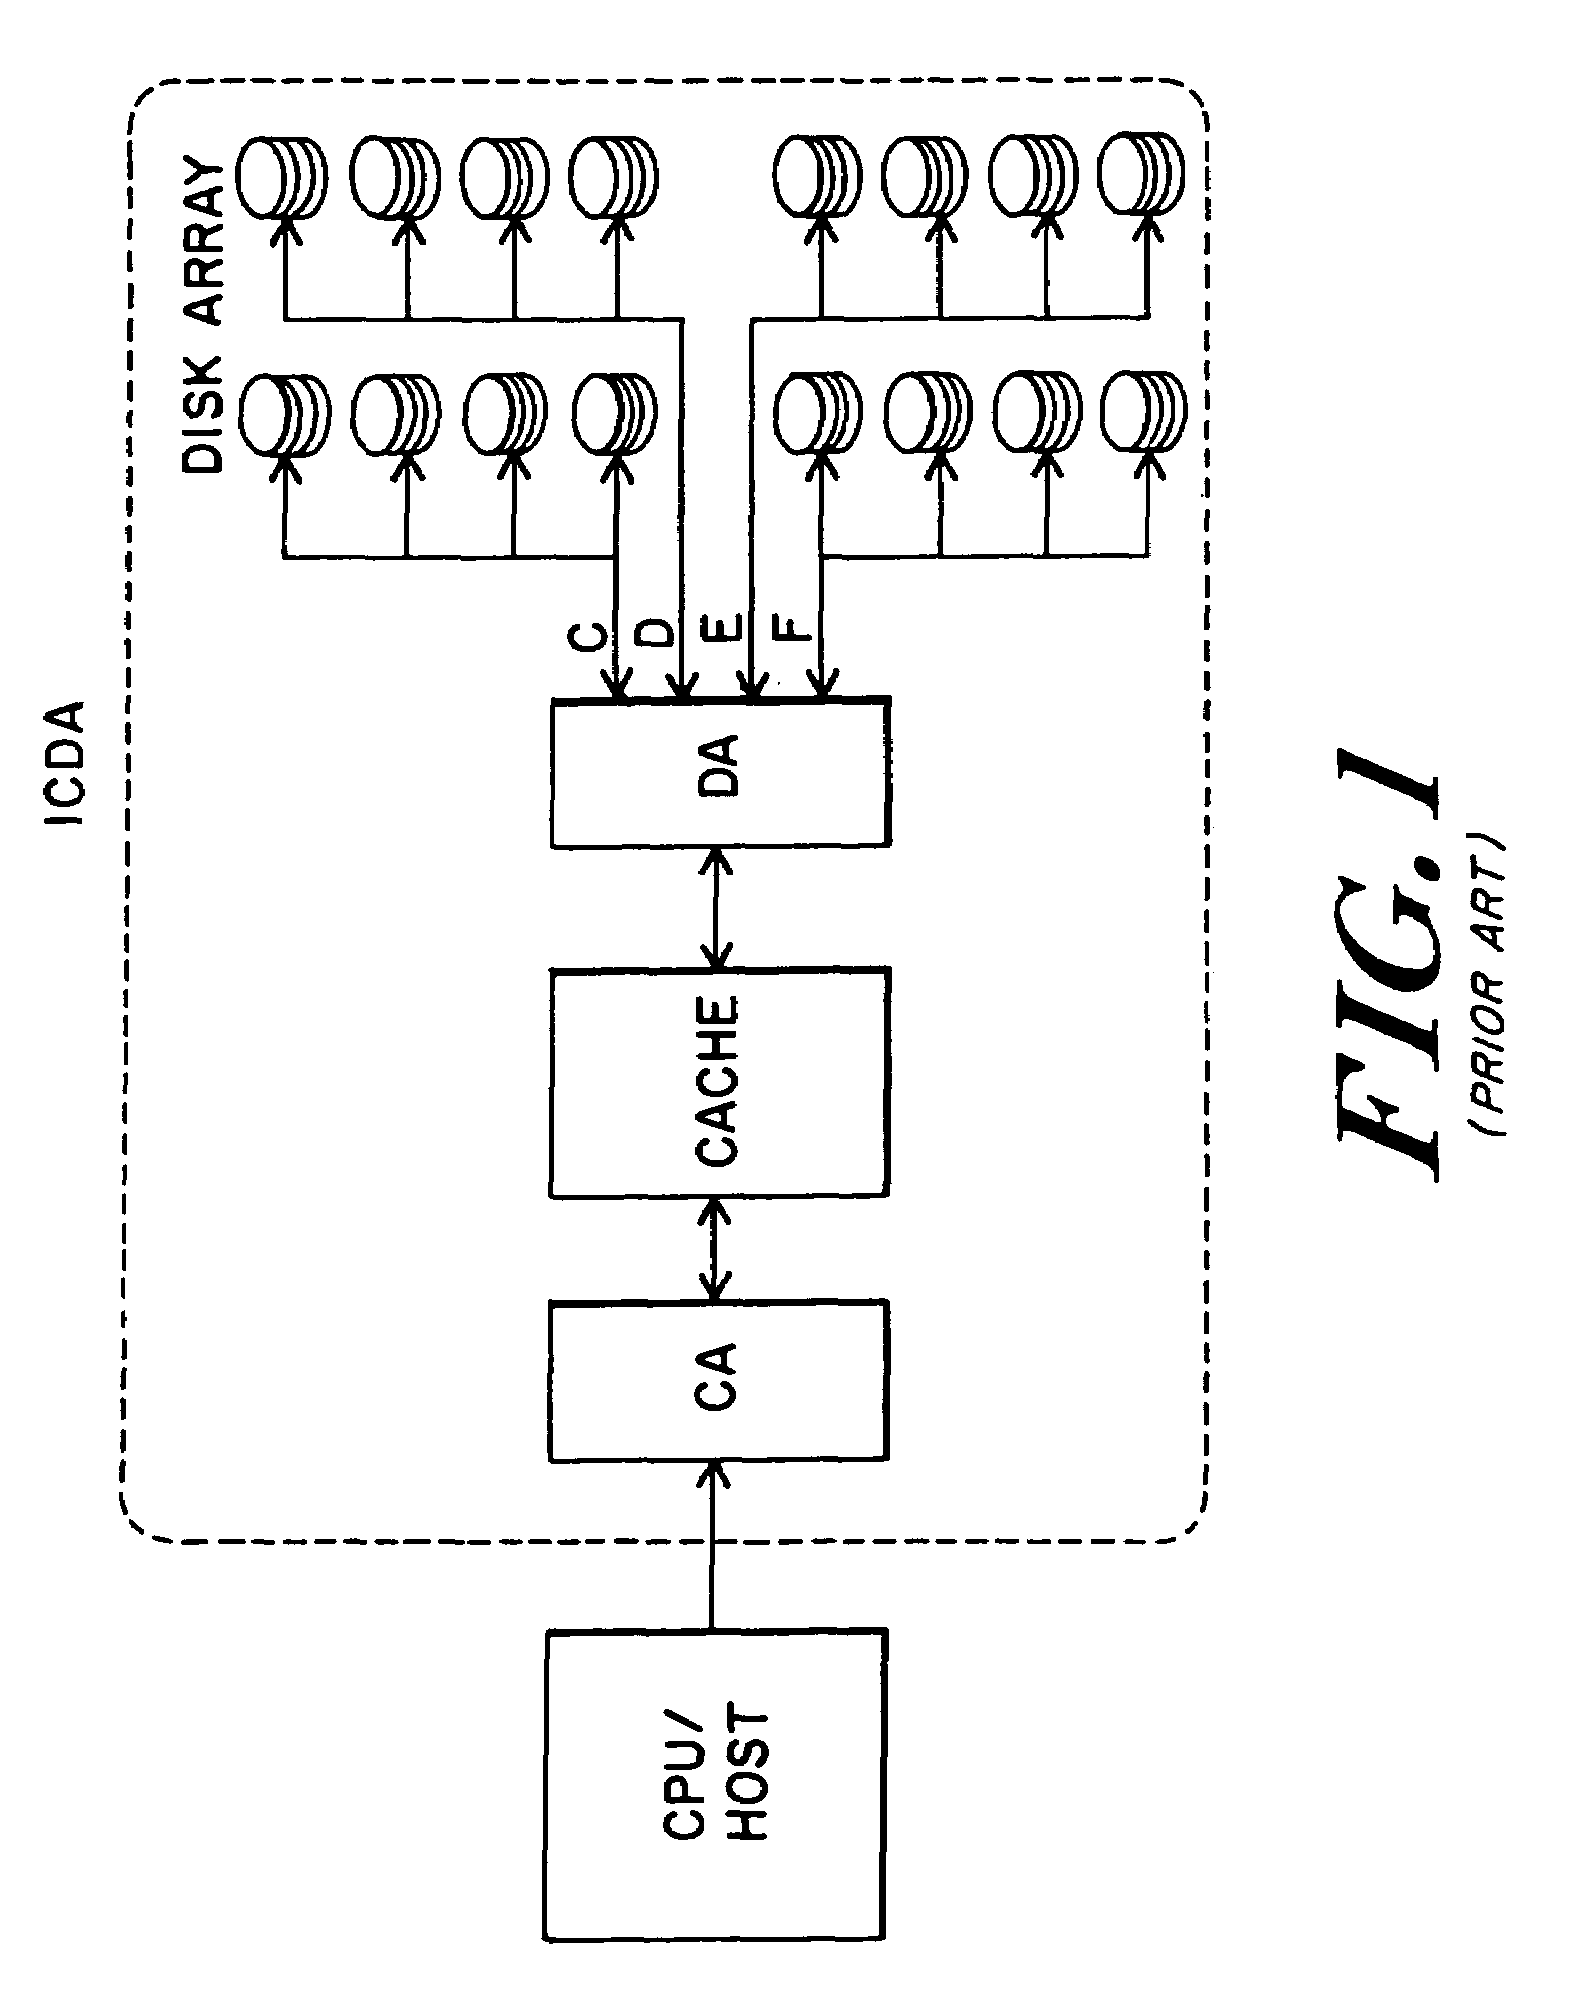 Messaging mechanism employing mailboxes for inter processor communications